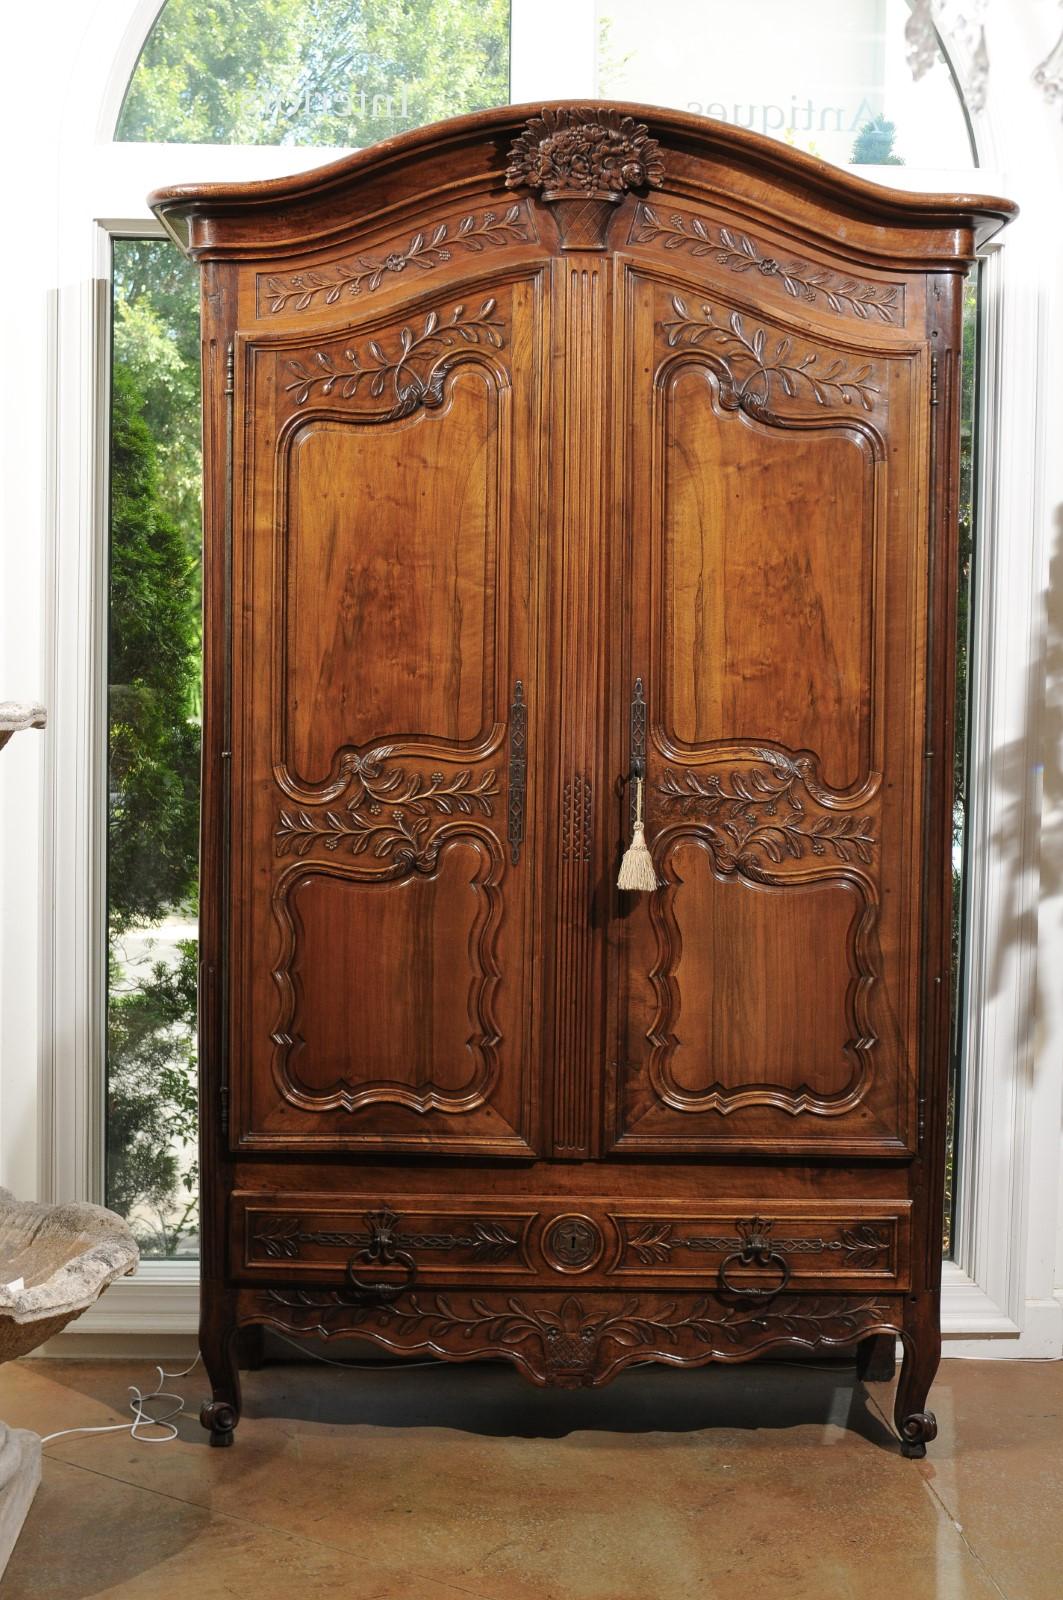 A French Louis XV period mid-18th century walnut armoire from Provence, with bonnet cornice, carved bouquet, molded door panels, foliage motifs and low drawer. Born in southern France during the reign of King Louis XV, this walnut Provençale armoire